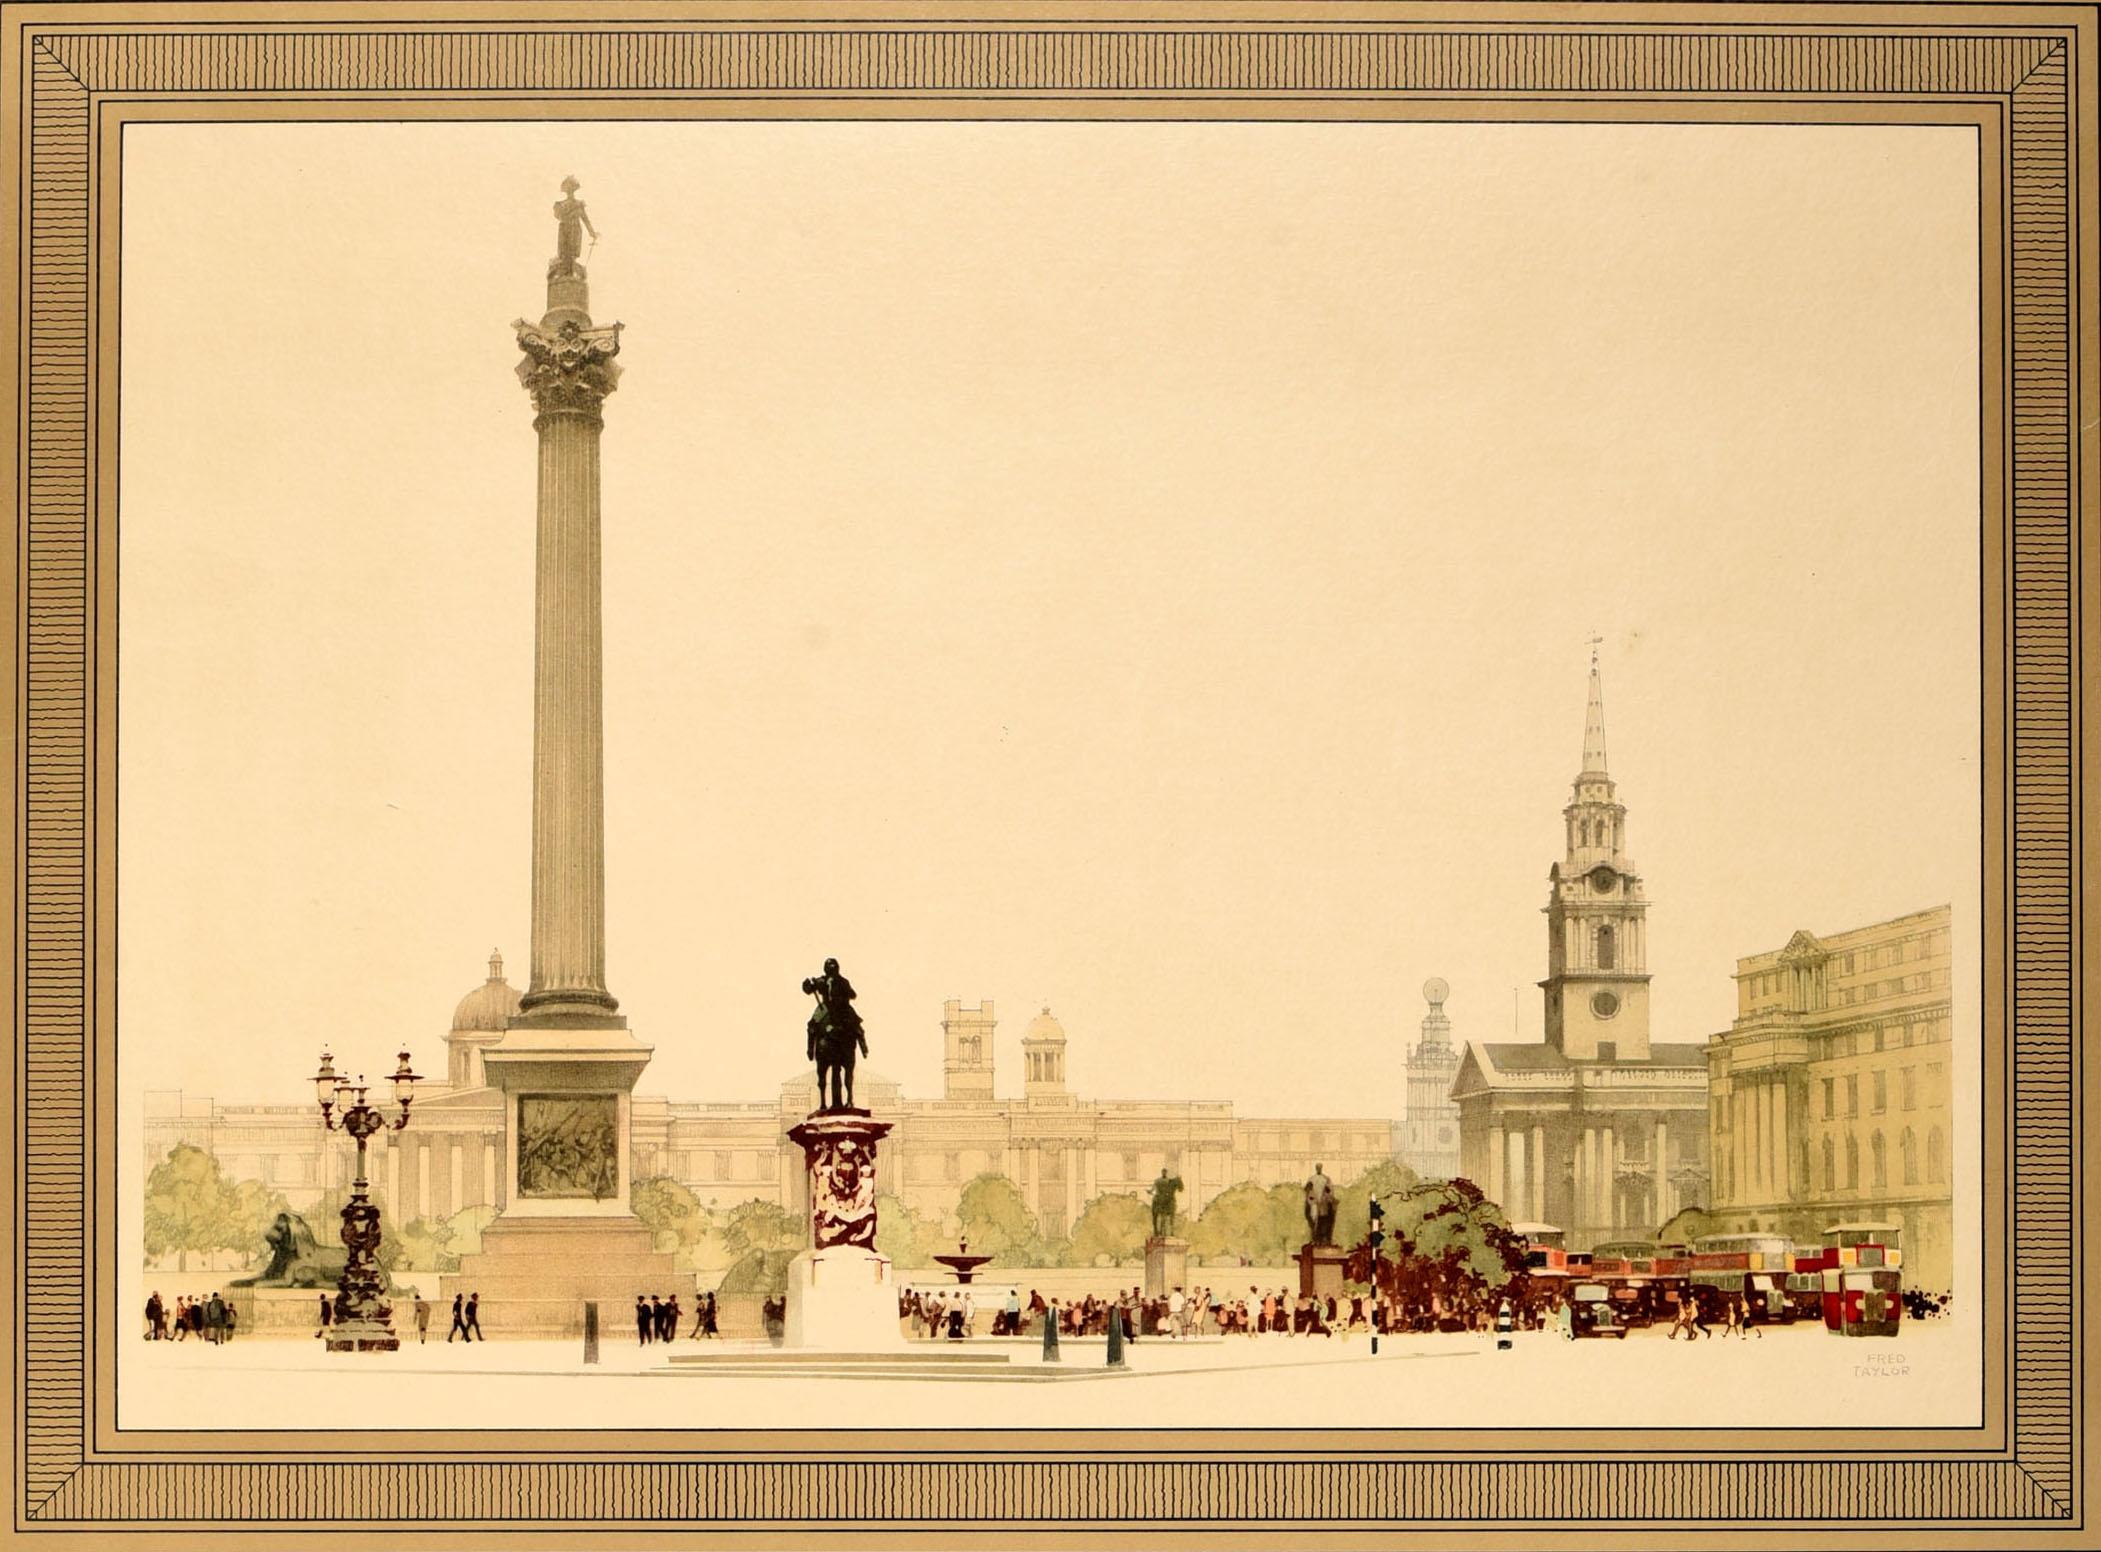 Original vintage post-war London Underground Transport poster for London Trafalgar Square featuring artwork by the notable British artist Fred Taylor (1875-1963) showing London buses, cars and taxis in front of the St Martin-in-the-Fields church and